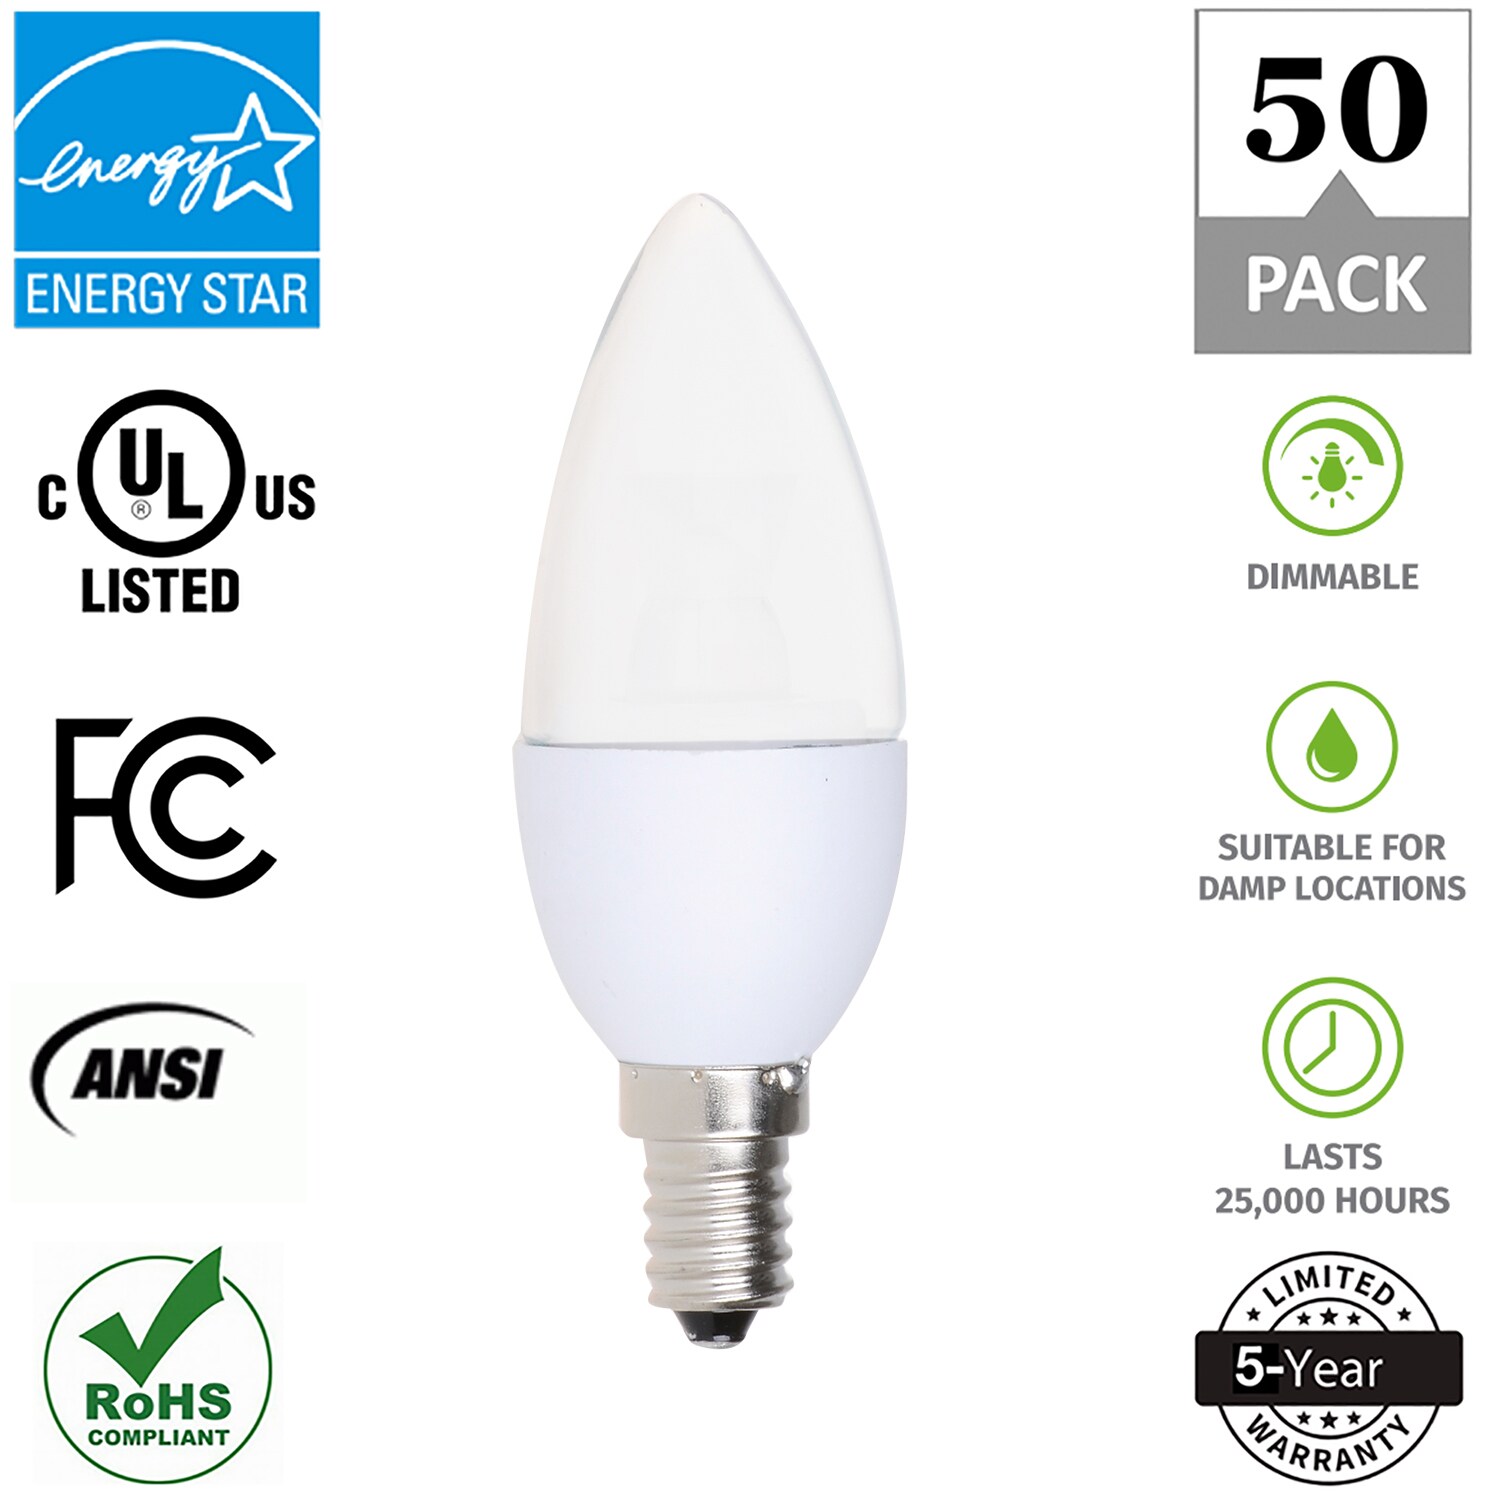 Simply Conserve Frosted Candelabra 40-Watt EQ B11 Warm White Dimmable LED Light Bulb (50-Pack)